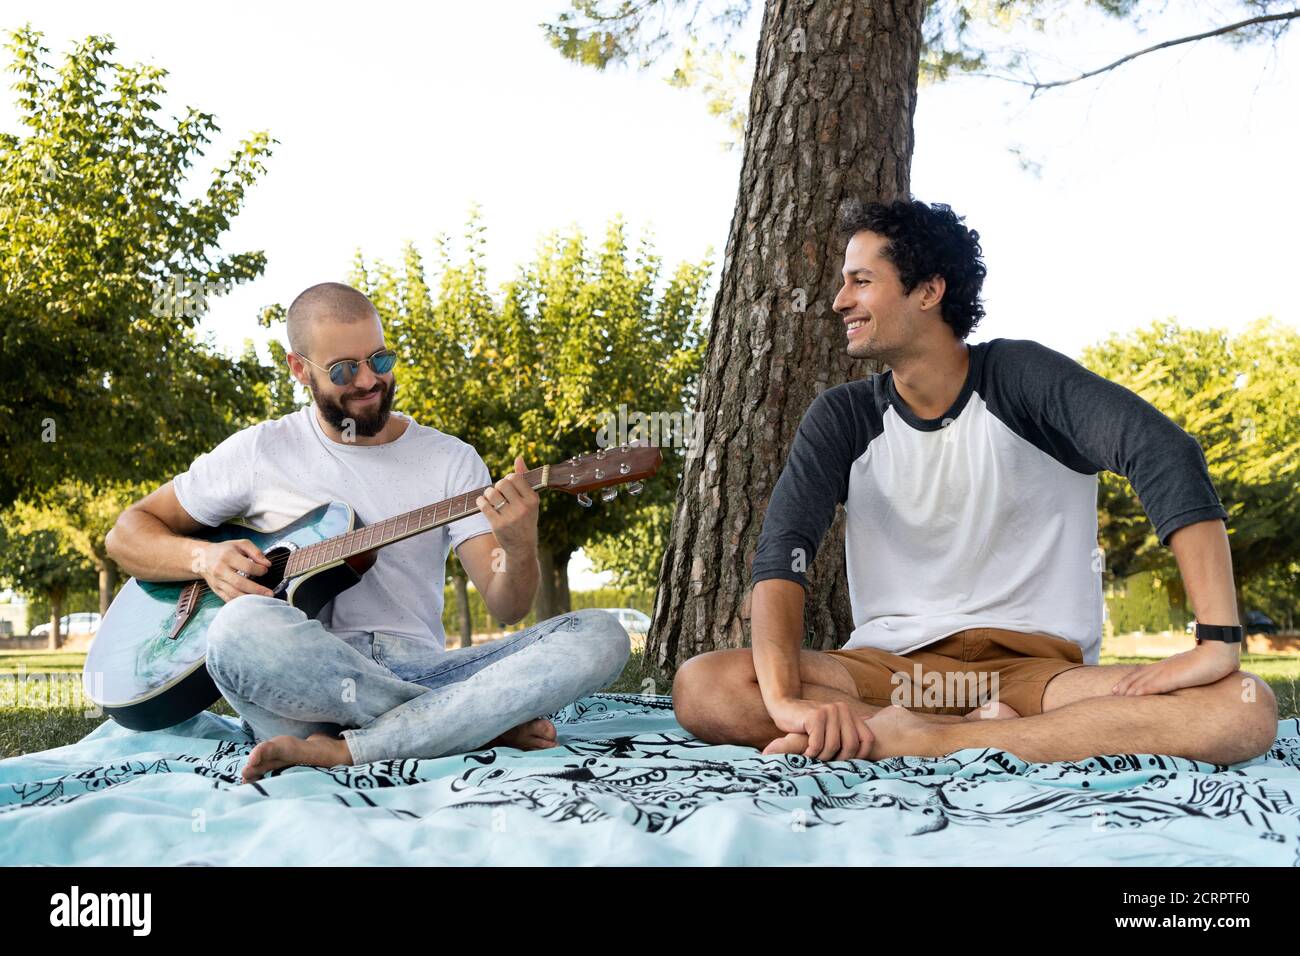 Two friends having fun and playing guitar in the park Stock Photo